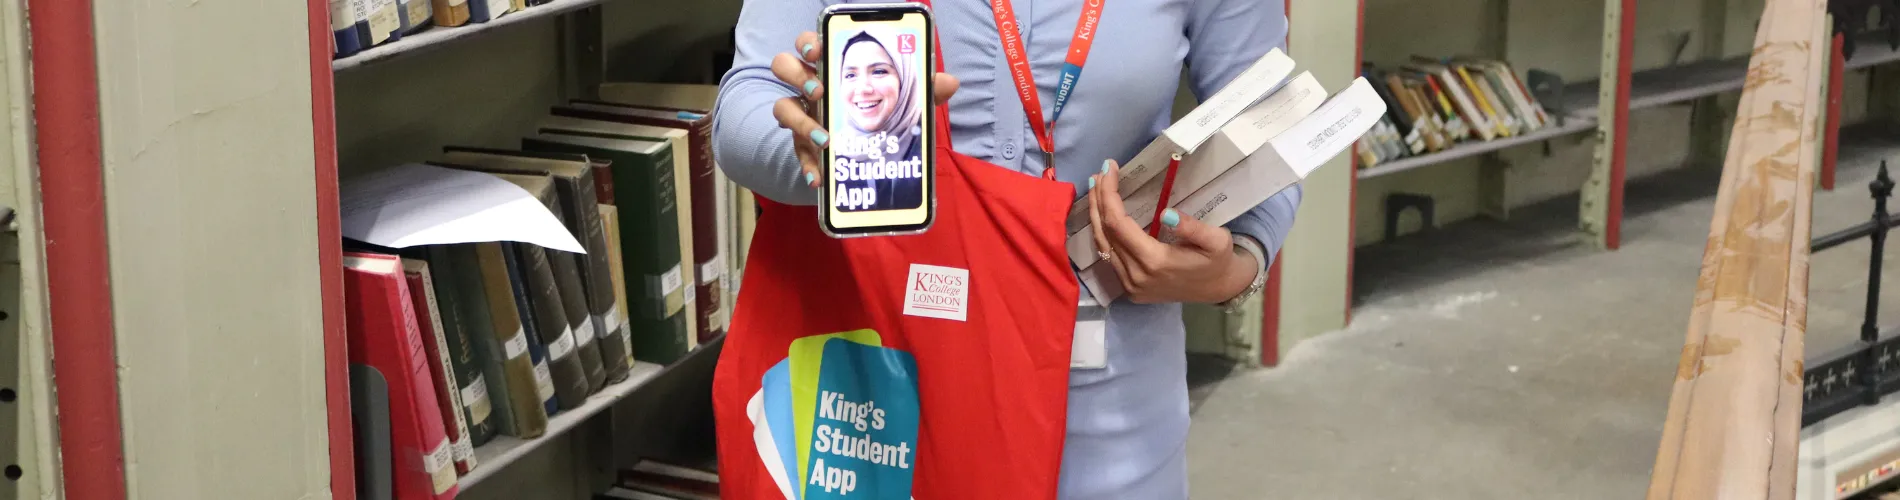 A student holding books and the King's Student App at the Maughan Library's Round Reading Room.